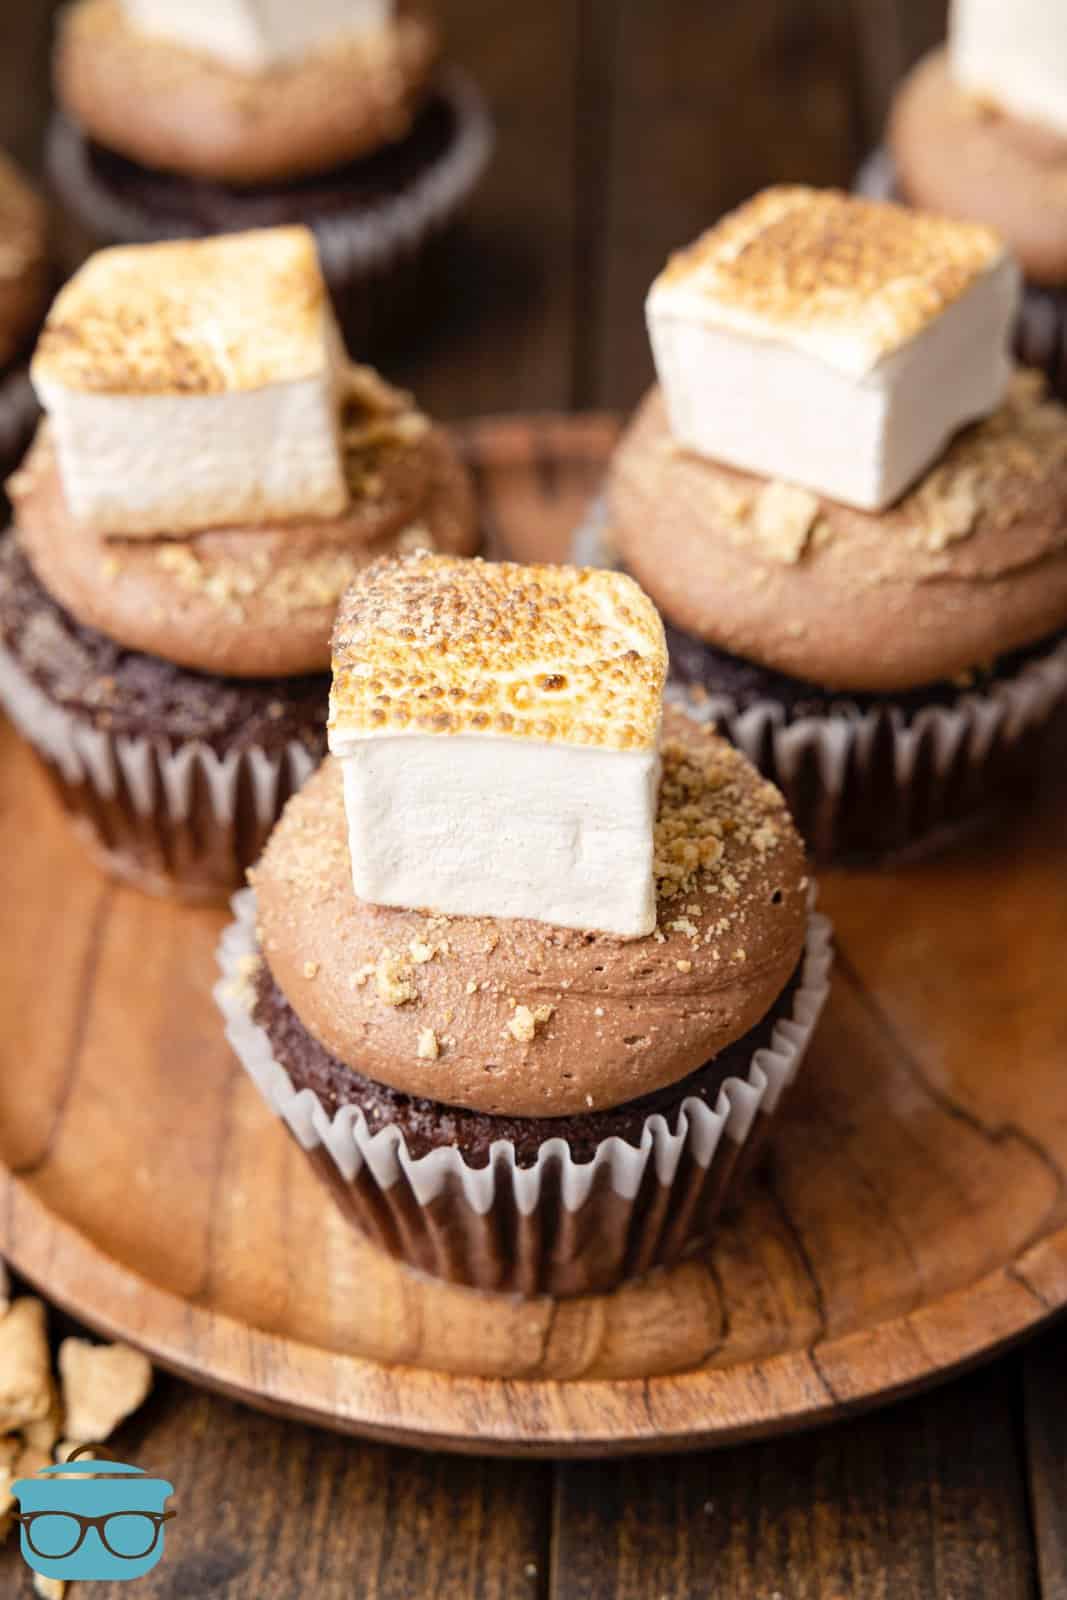 S'mores Cupcakes on wooden board showing off the toasted marshmallow.